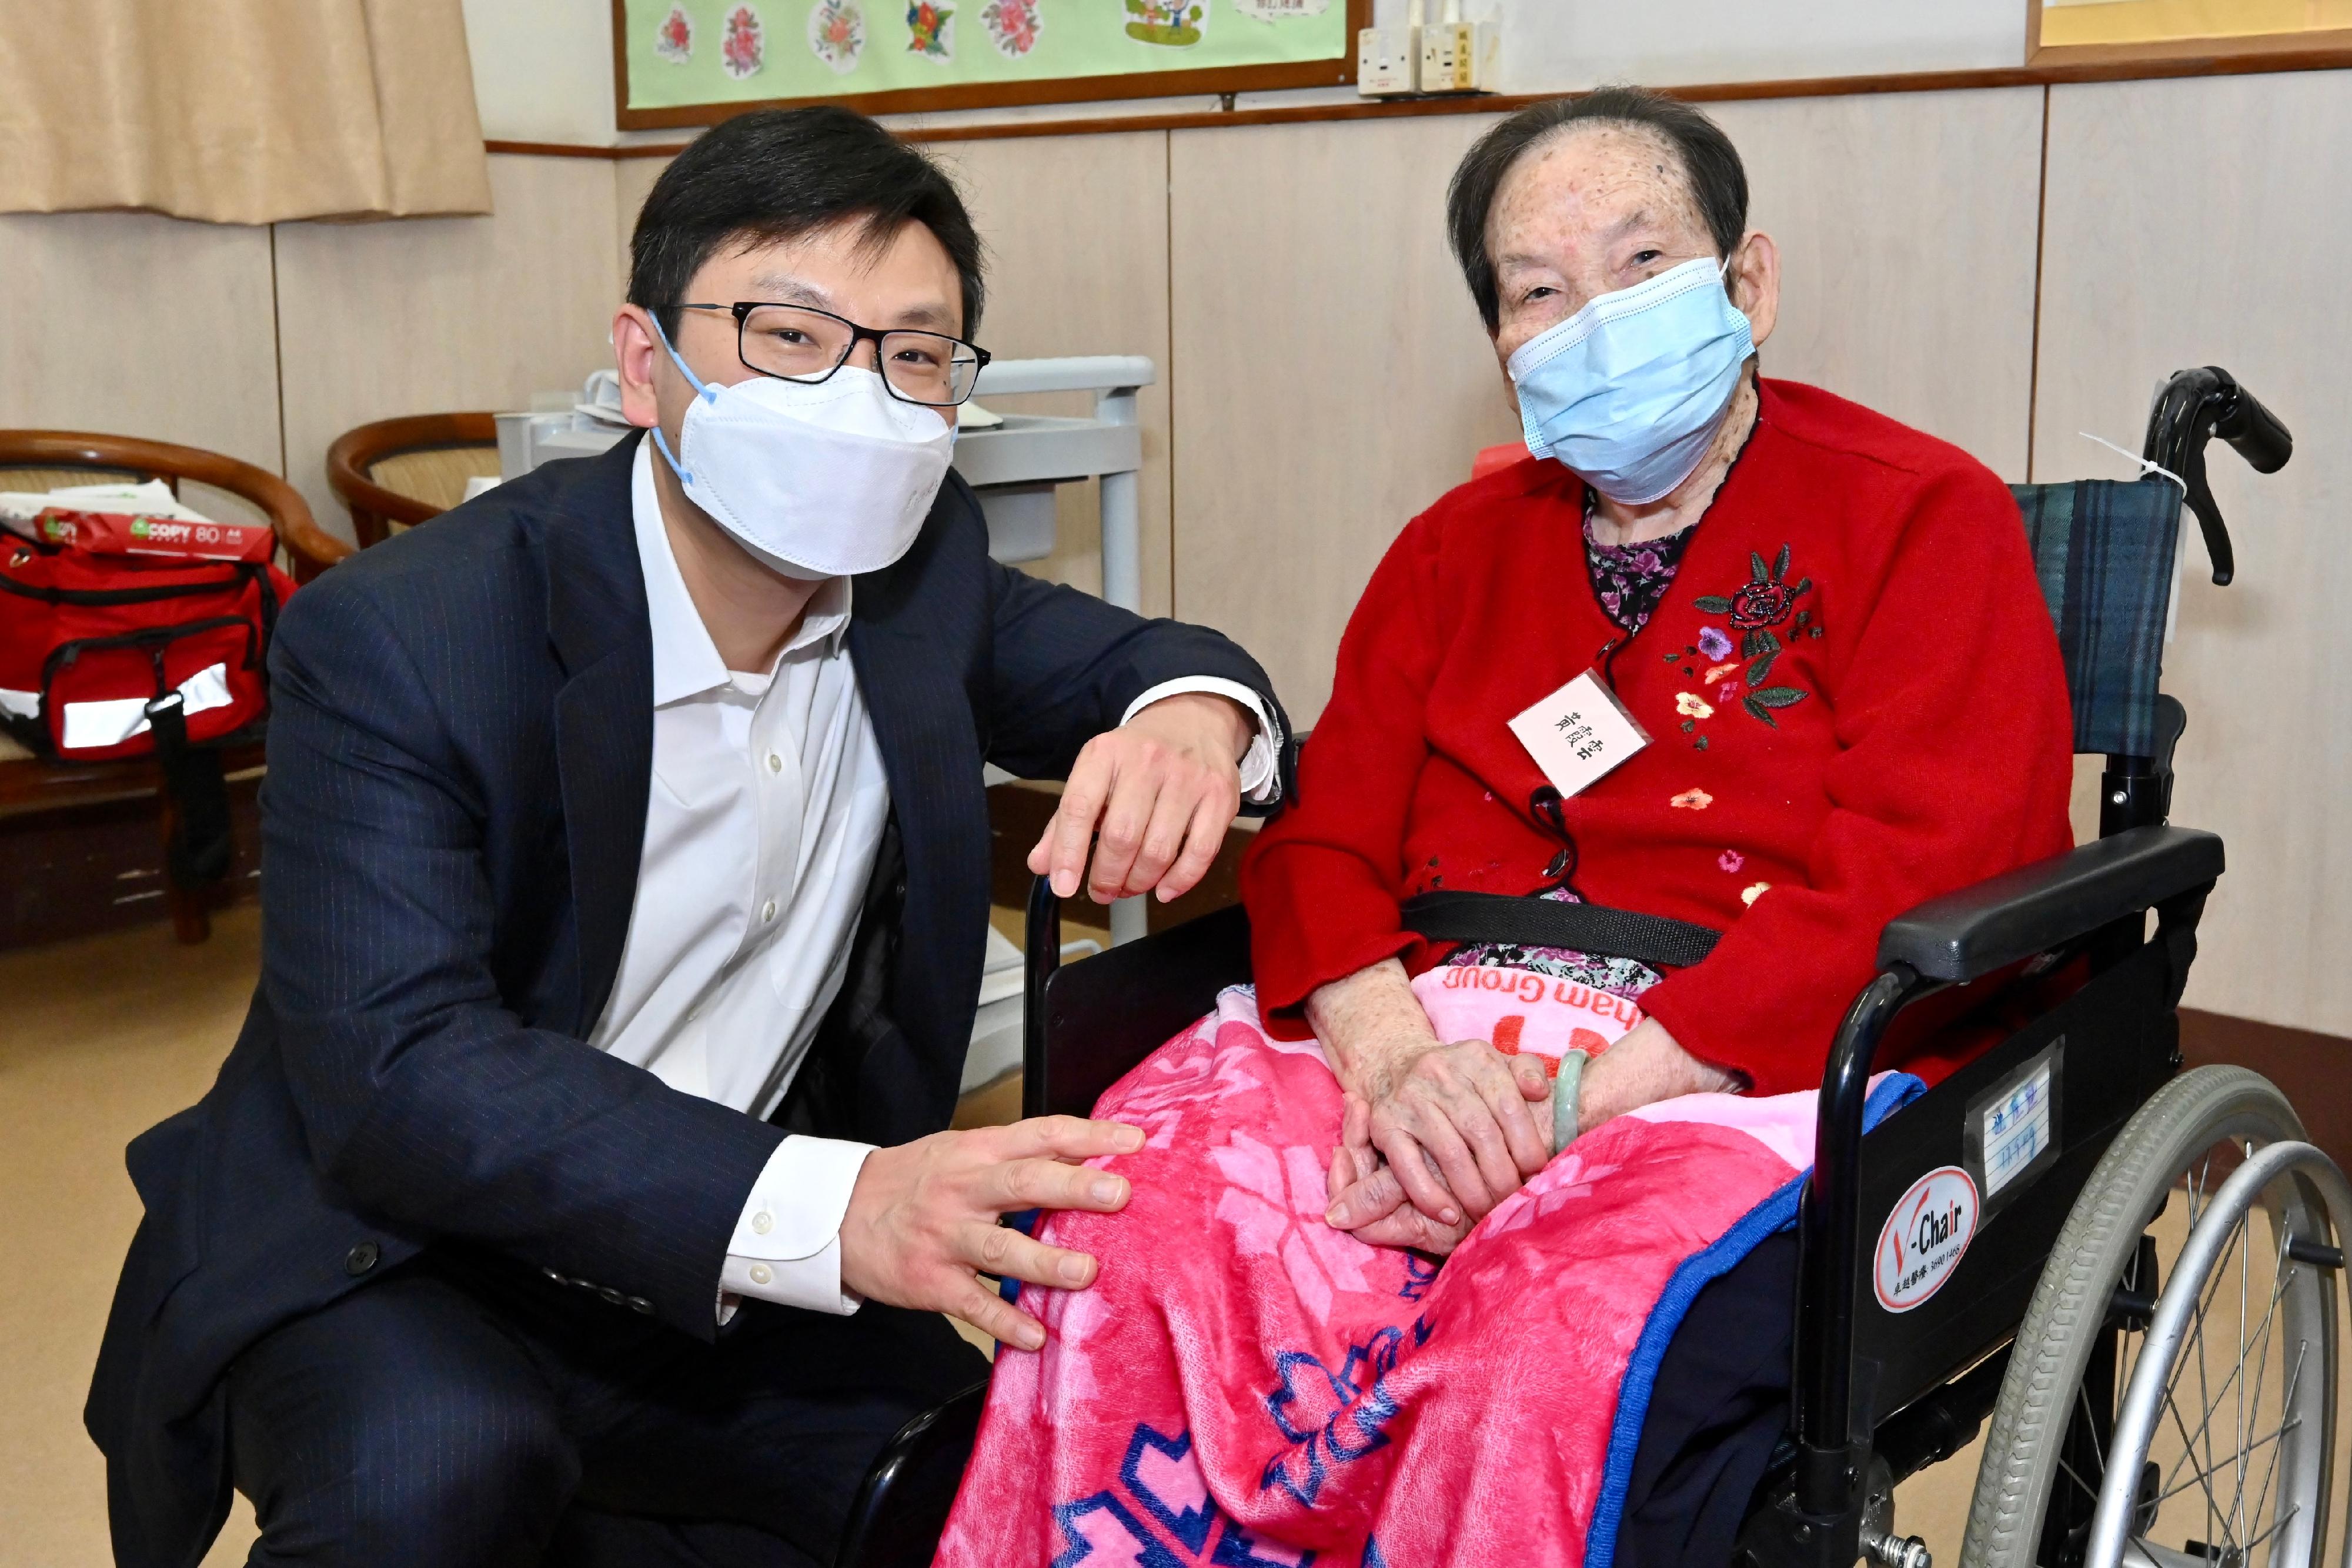 The Secretary for Labour and Welfare, Mr Chris Sun, today (July 5) inspected a COVID-19 vaccination day at a residential care home for the elderly in Ho Man Tin to take a closer look at the latest progress of outreach vaccination for residential care homes. Photo shows Mr Sun (left) with a resident receiving vaccination today, reminding her to take heed of the epidemic's developments and get vaccinated in a timely manner.